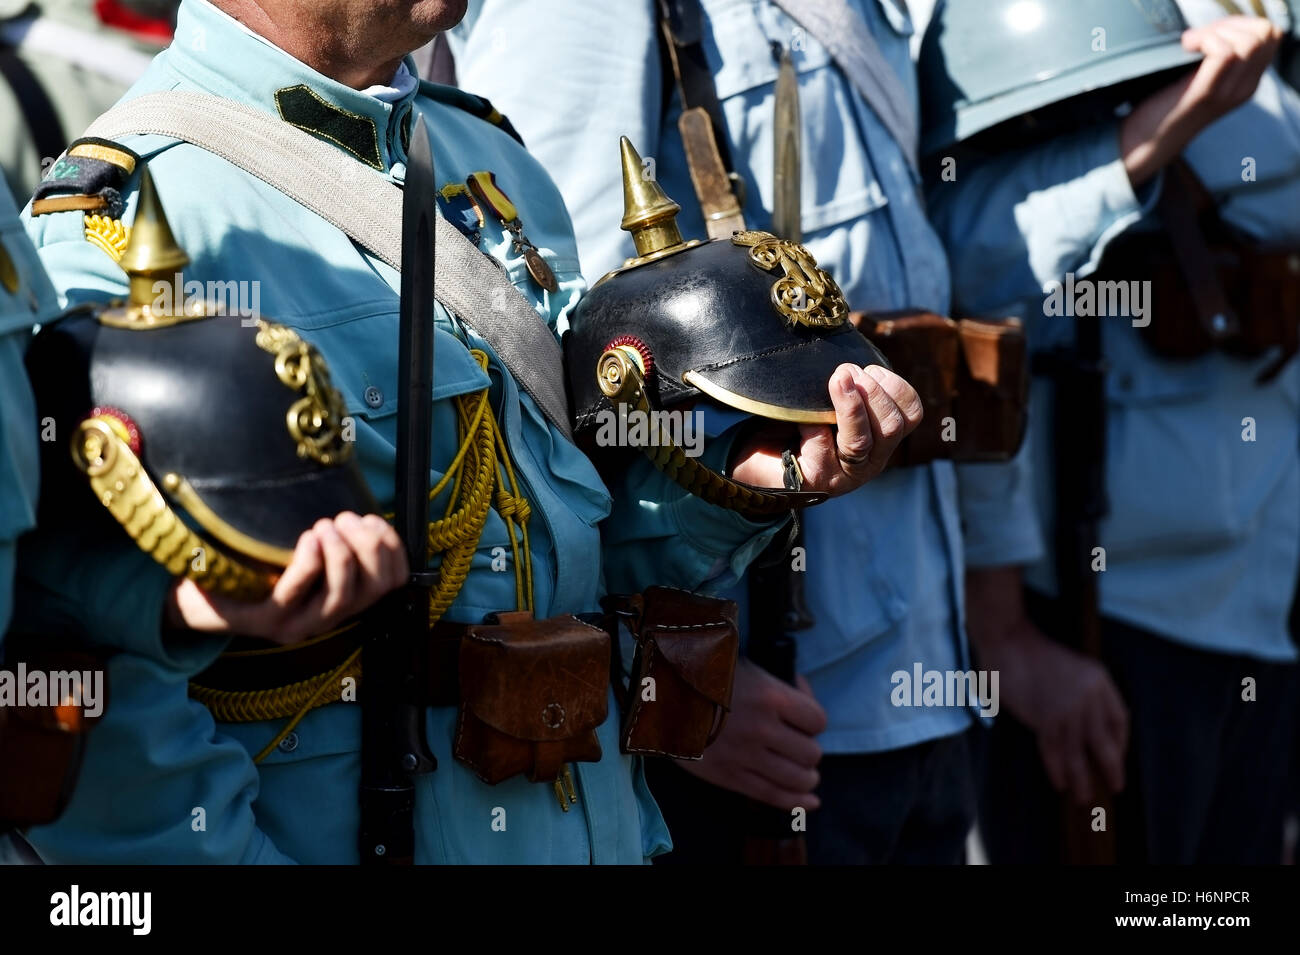 Historical military reenactment with soldier uniforms from World War One Stock Photo